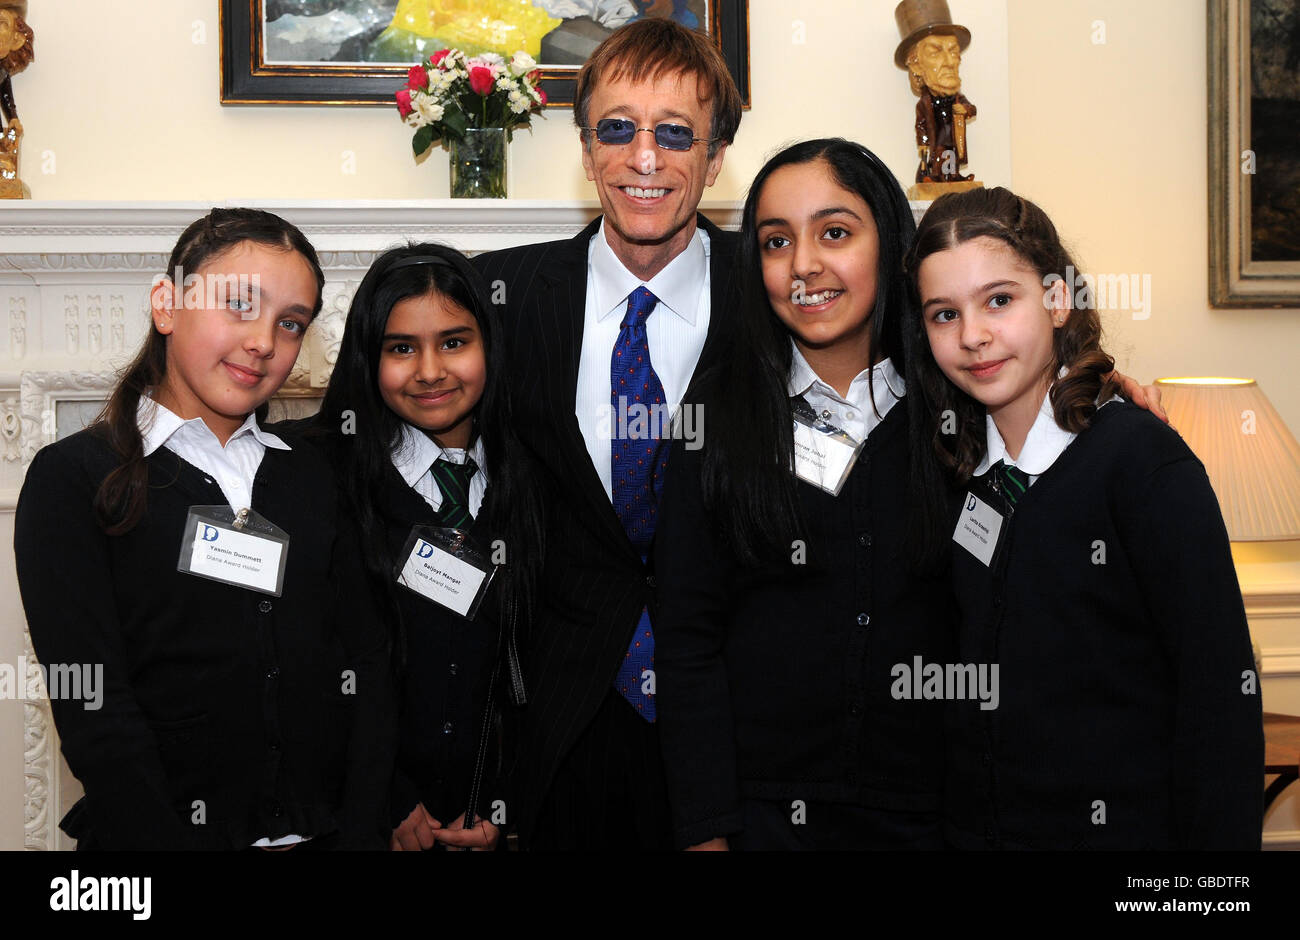 Bee Gee Robin Gibb, 59, attending a reception for Diana Award winners at 11 Downing Street with Yeading Junior School students, recognised for their work in peer mediation (left to right) Baljoyt Mangat, Simran Johal, Lorita Krsniqi and Yasmin Dummett. Stock Photo